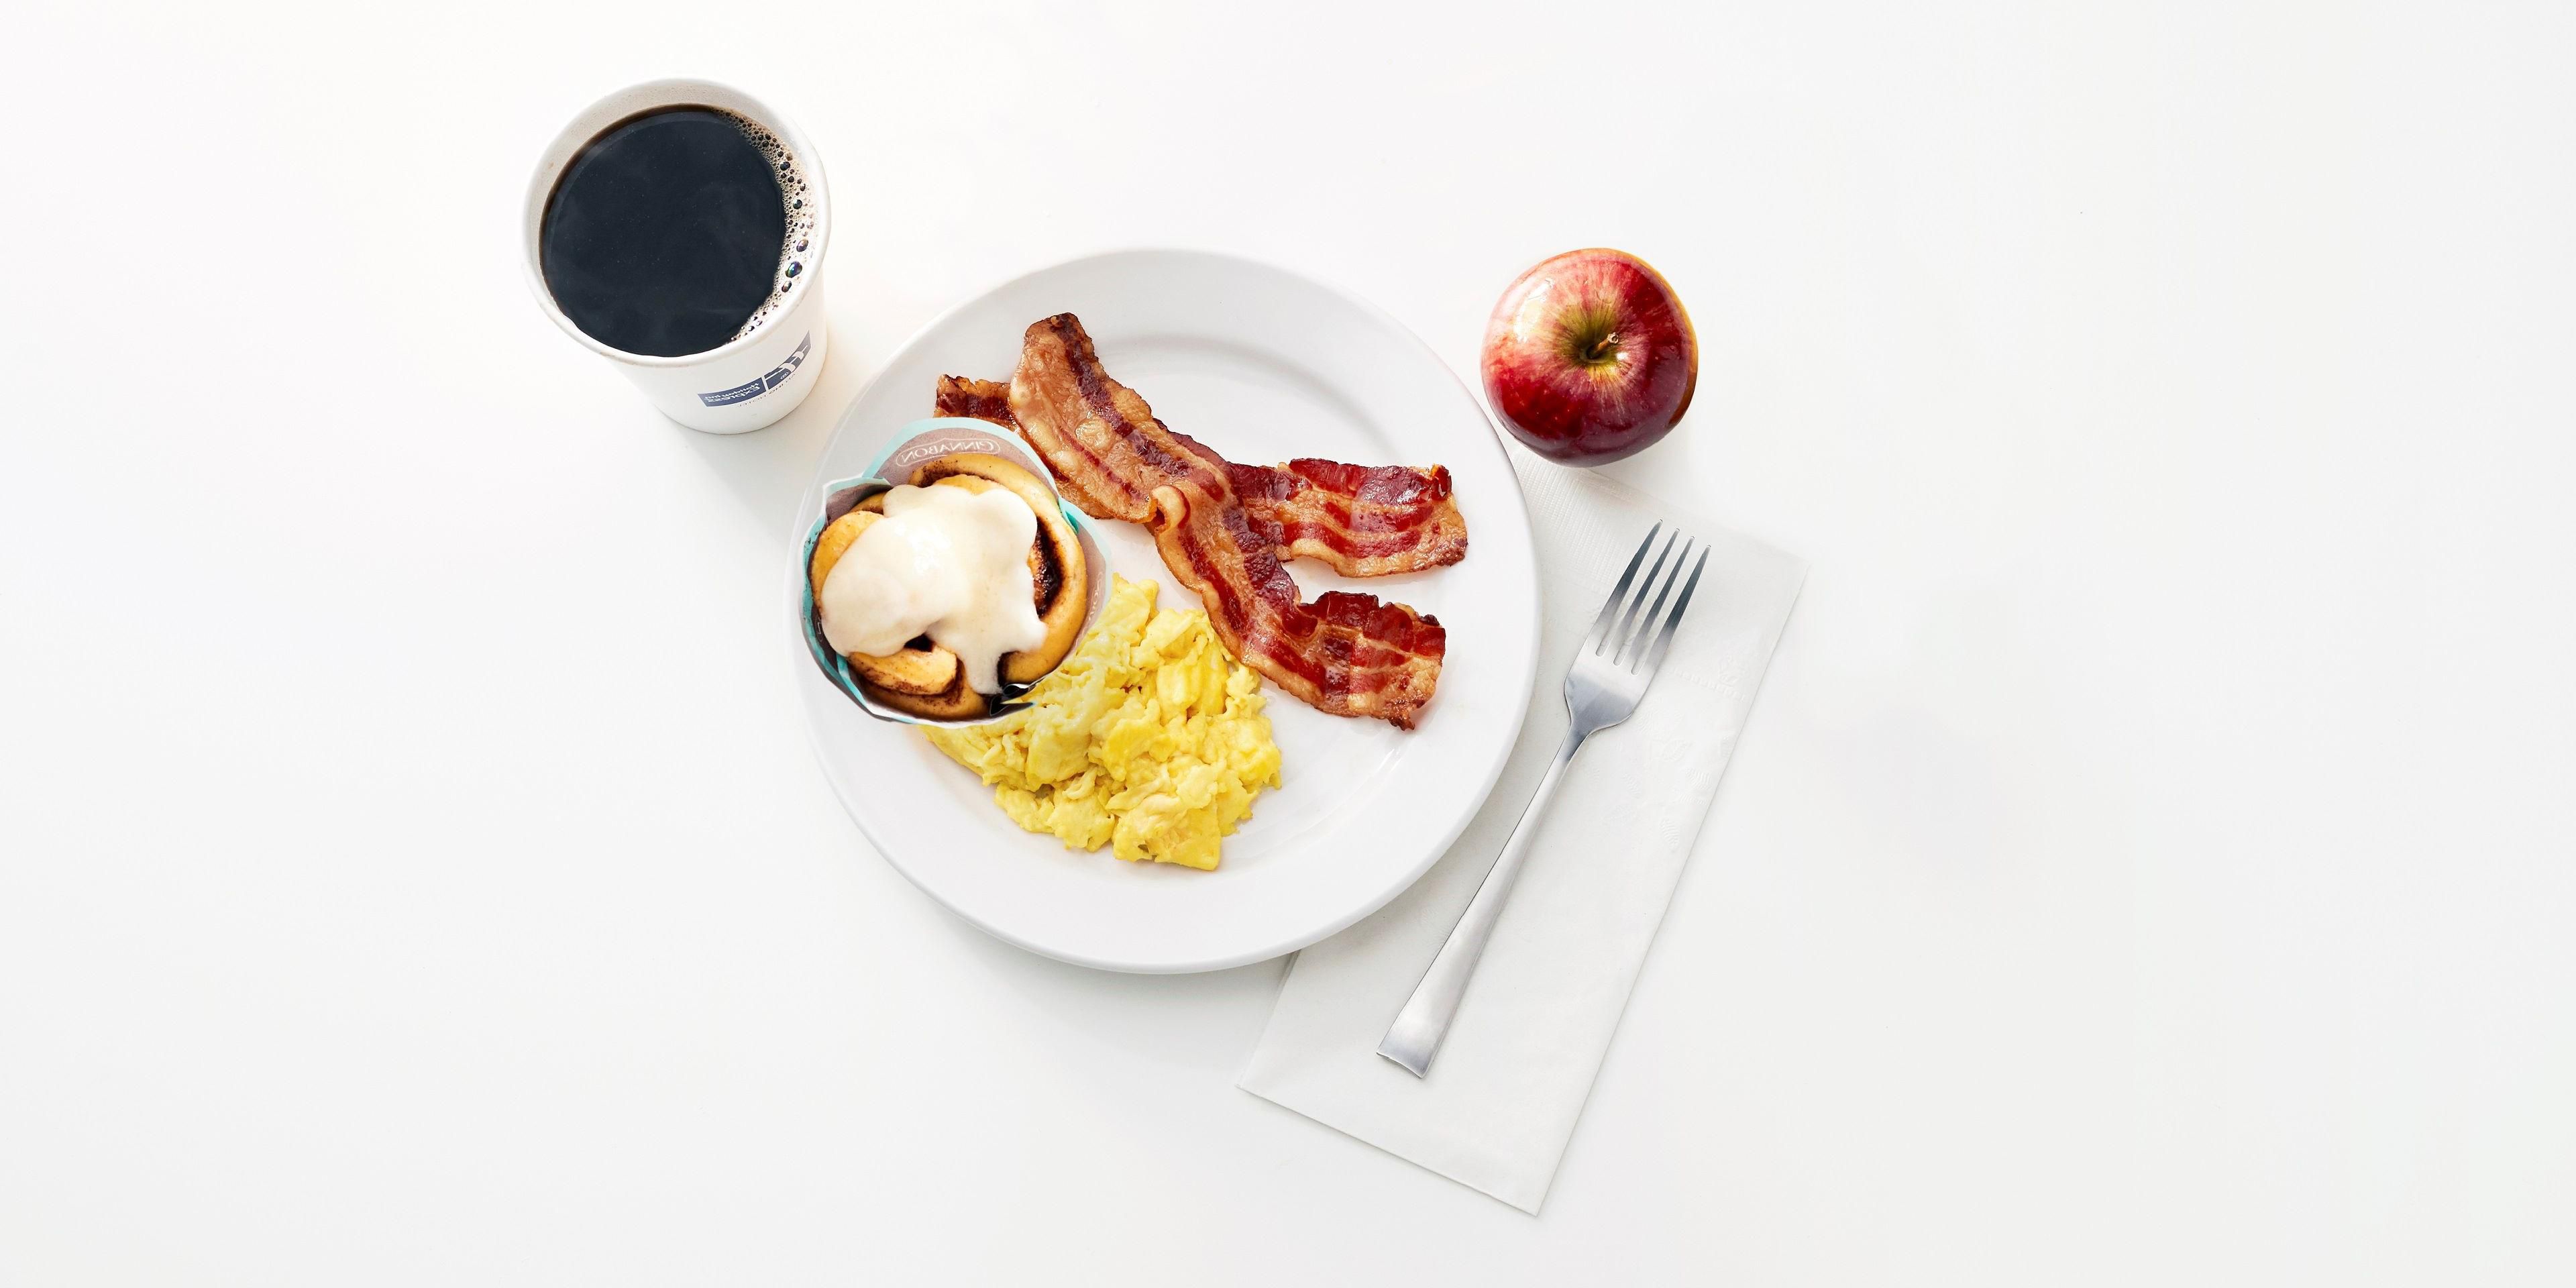 Kick start your day with our free Express Start Breakfast, with grab ‘n’ go options and favorites such as eggs and bacon, hot pancakes, our signature cinnamon rolls and fresh coffee. Offered from 6:00 AM to 10:00 AM.